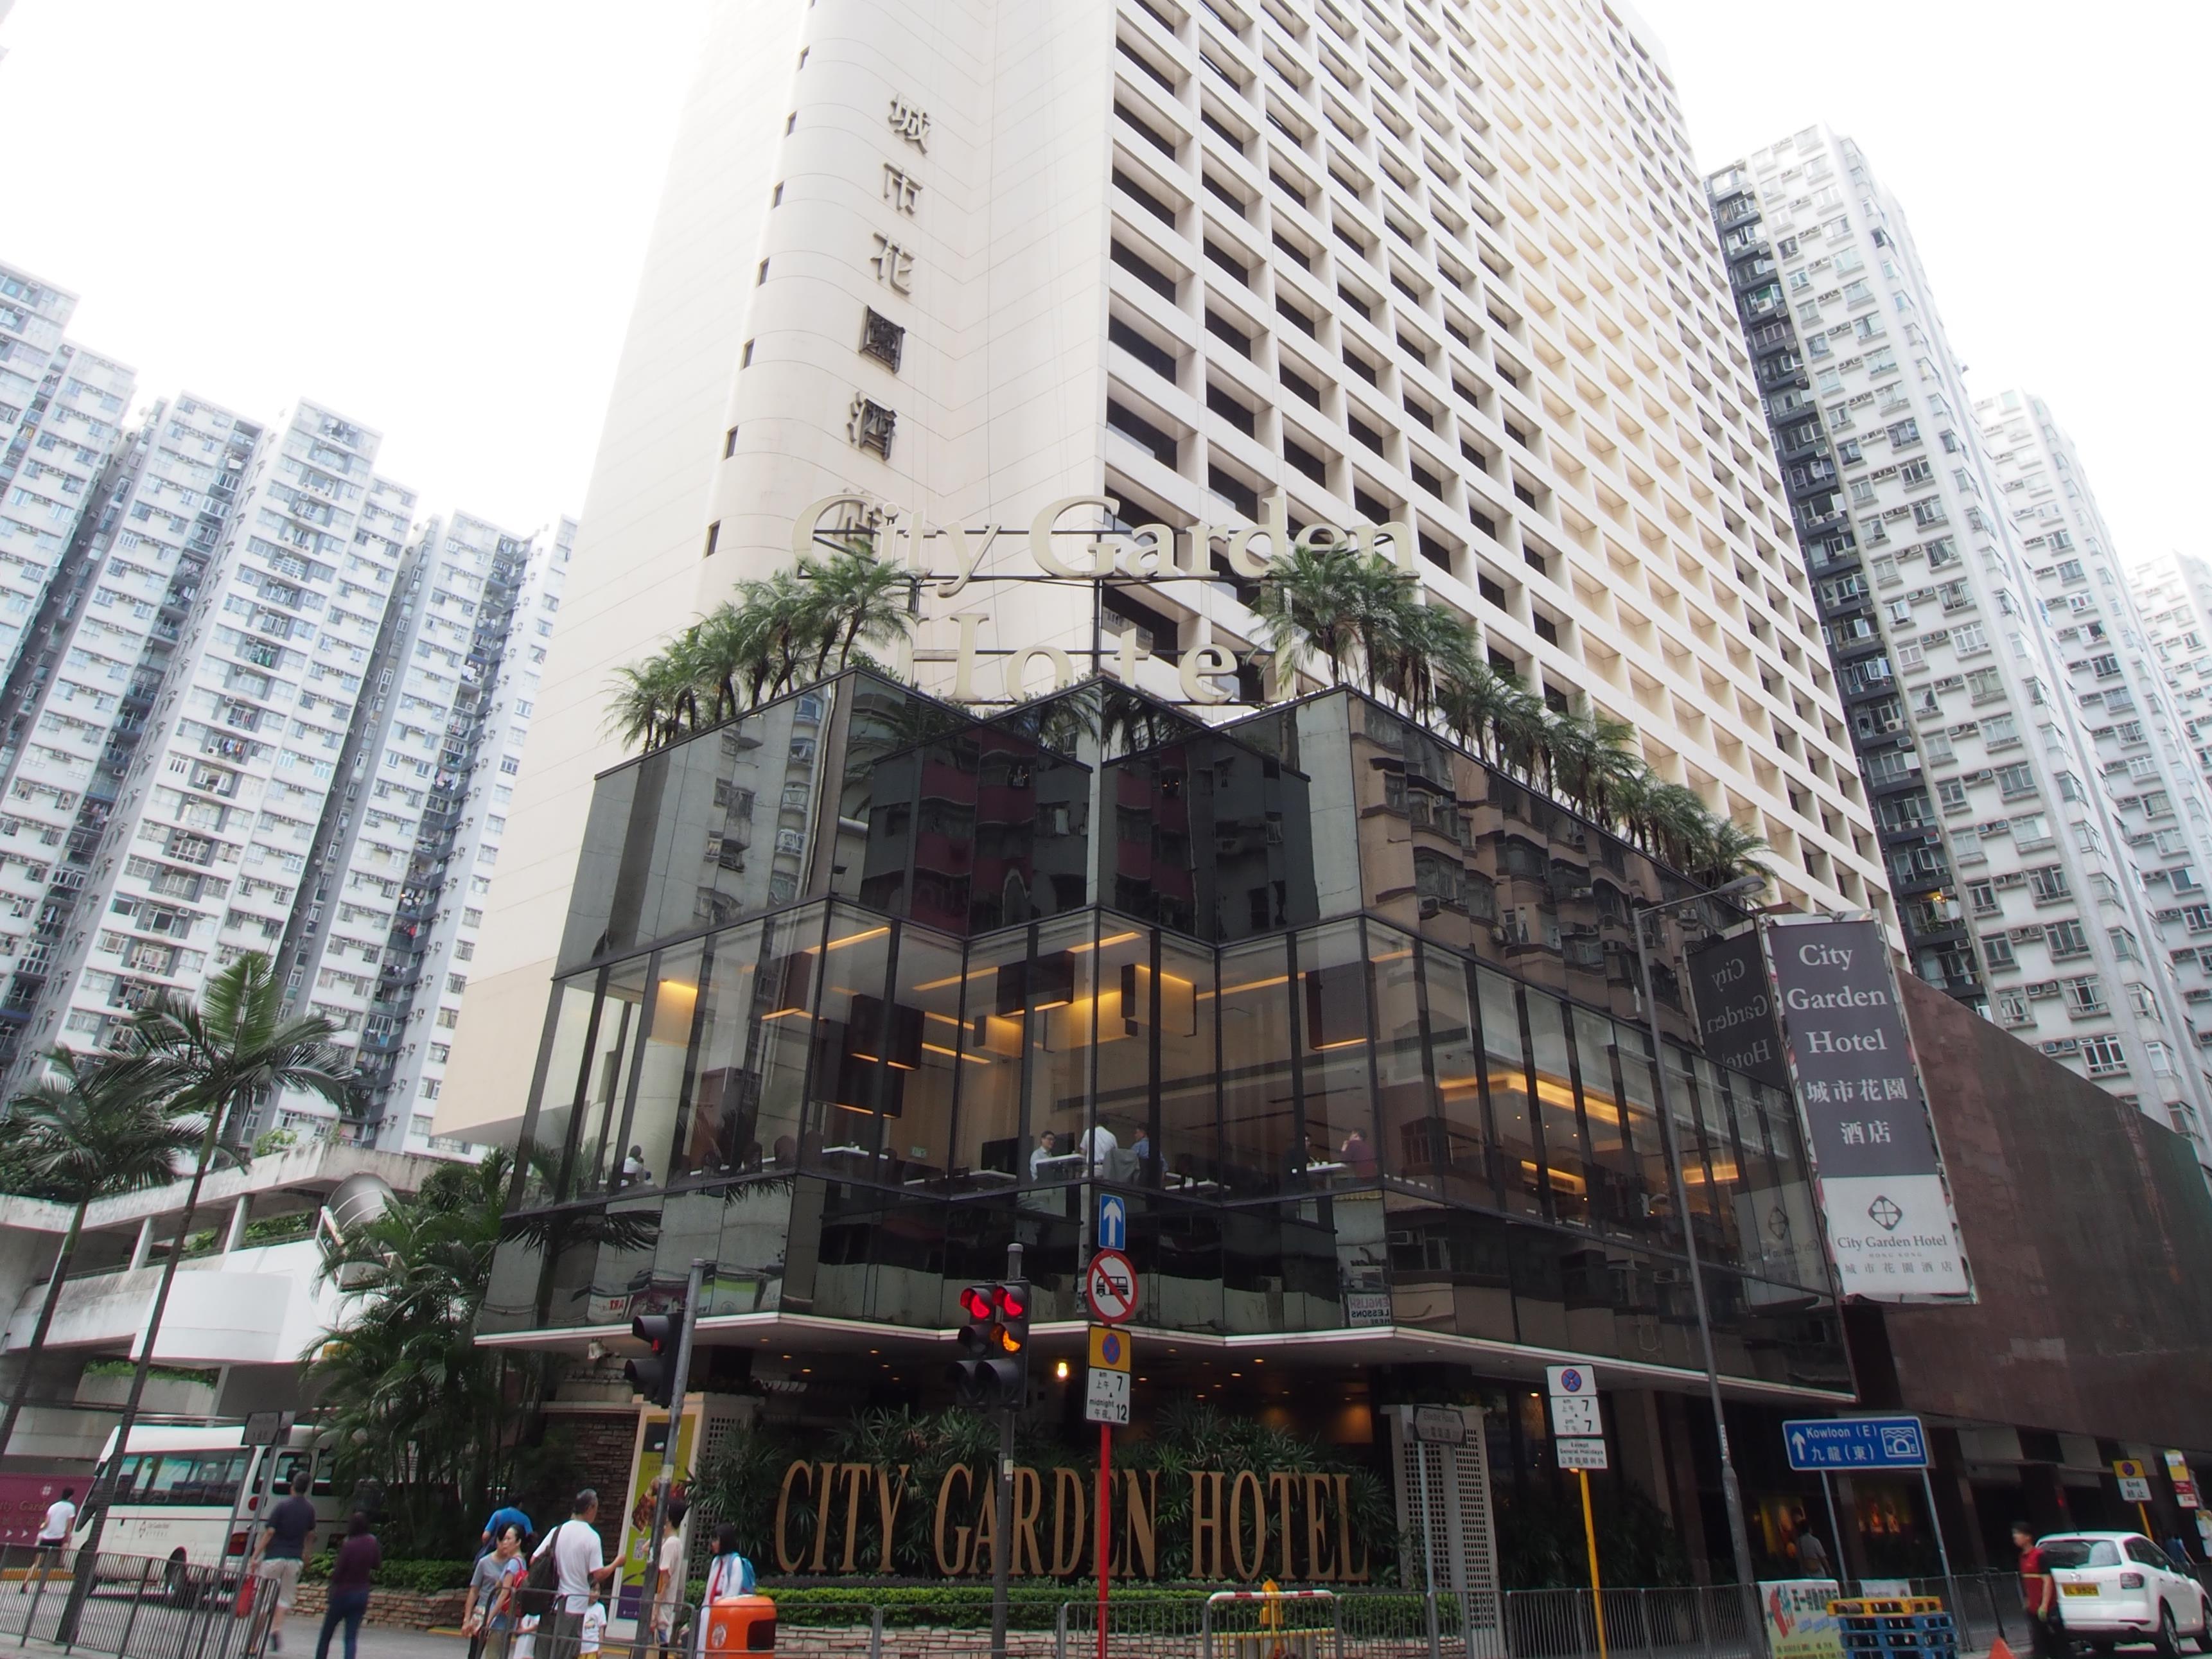 City Garden Hotel Hong Kong FAQ 2016, What facilities are there in City Garden Hotel Hong Kong 2016, What Languages Spoken are Supported in City Garden Hotel Hong Kong 2016, Which payment cards are accepted in City Garden Hotel Hong Kong , Hong Kong City Garden Hotel room facilities and services Q&A 2016, Hong Kong City Garden Hotel online booking services 2016, Hong Kong City Garden Hotel address 2016, Hong Kong City Garden Hotel telephone number 2016,Hong Kong City Garden Hotel map 2016, Hong Kong City Garden Hotel traffic guide 2016, how to go Hong Kong City Garden Hotel, Hong Kong City Garden Hotel booking online 2016, Hong Kong City Garden Hotel room types 2016.